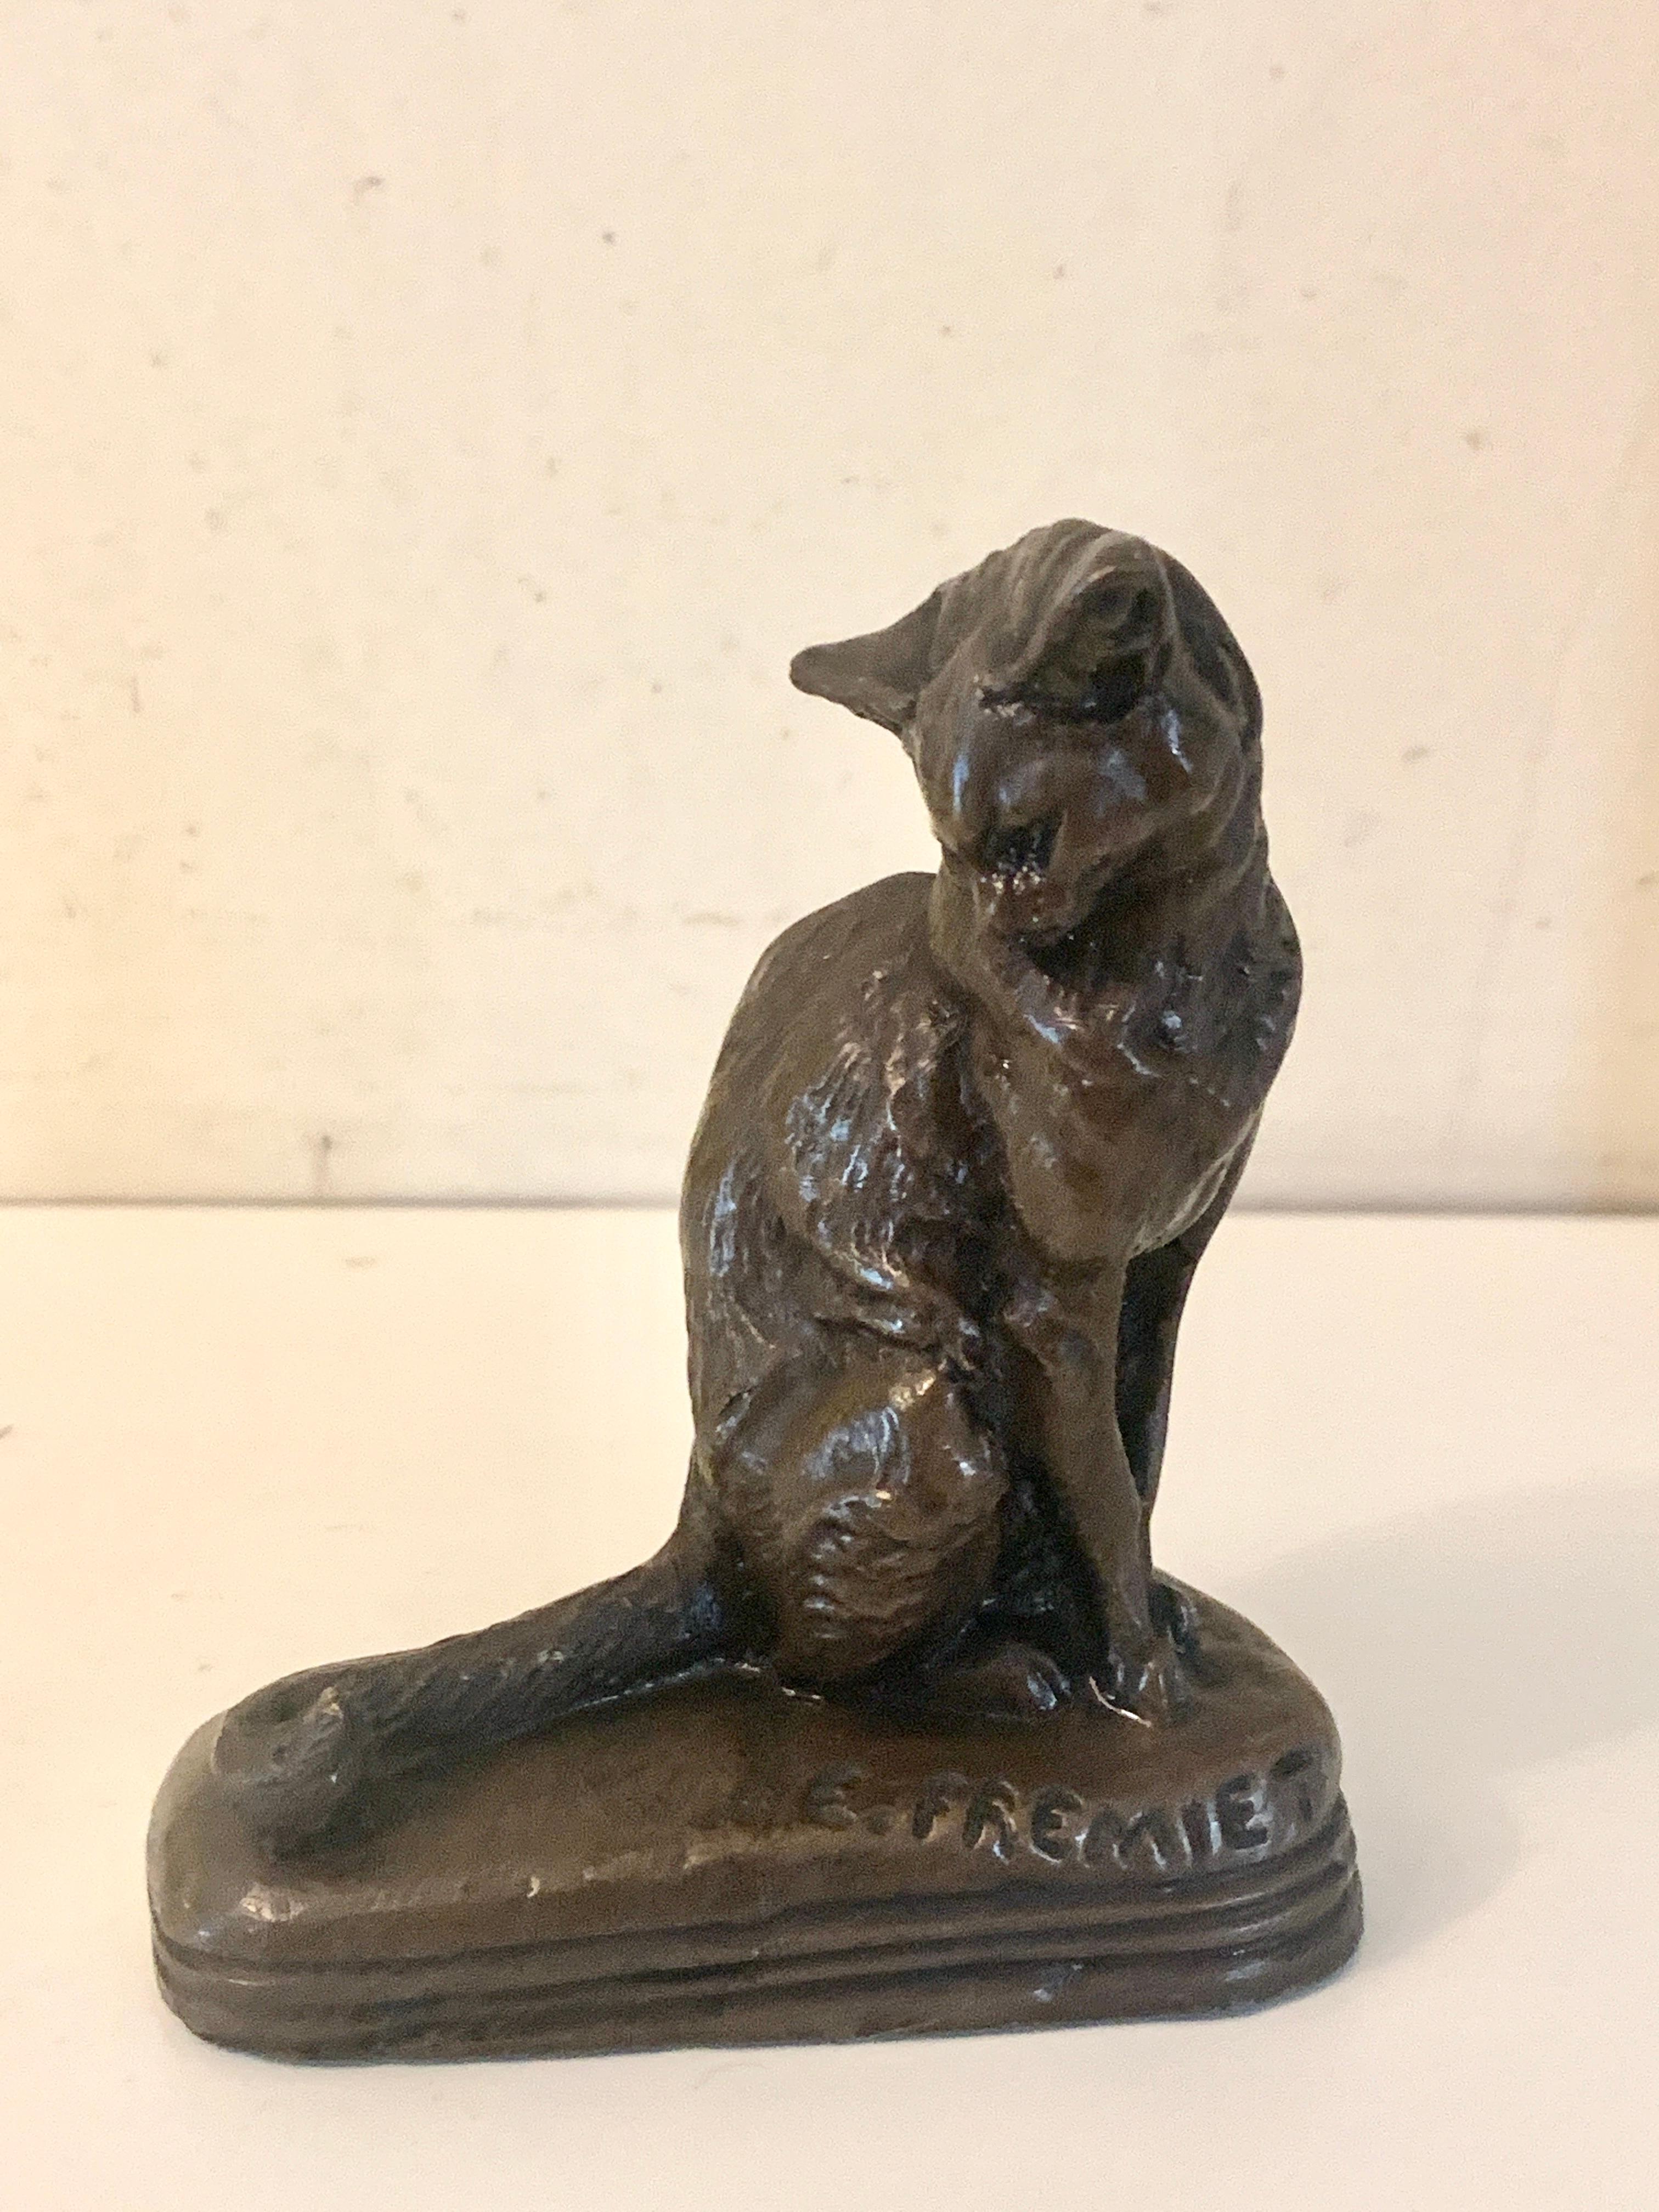 Emmanuel Fremiet Figurative Sculpture - 19th century French Bronze of a seated Cat, cast in Paris France